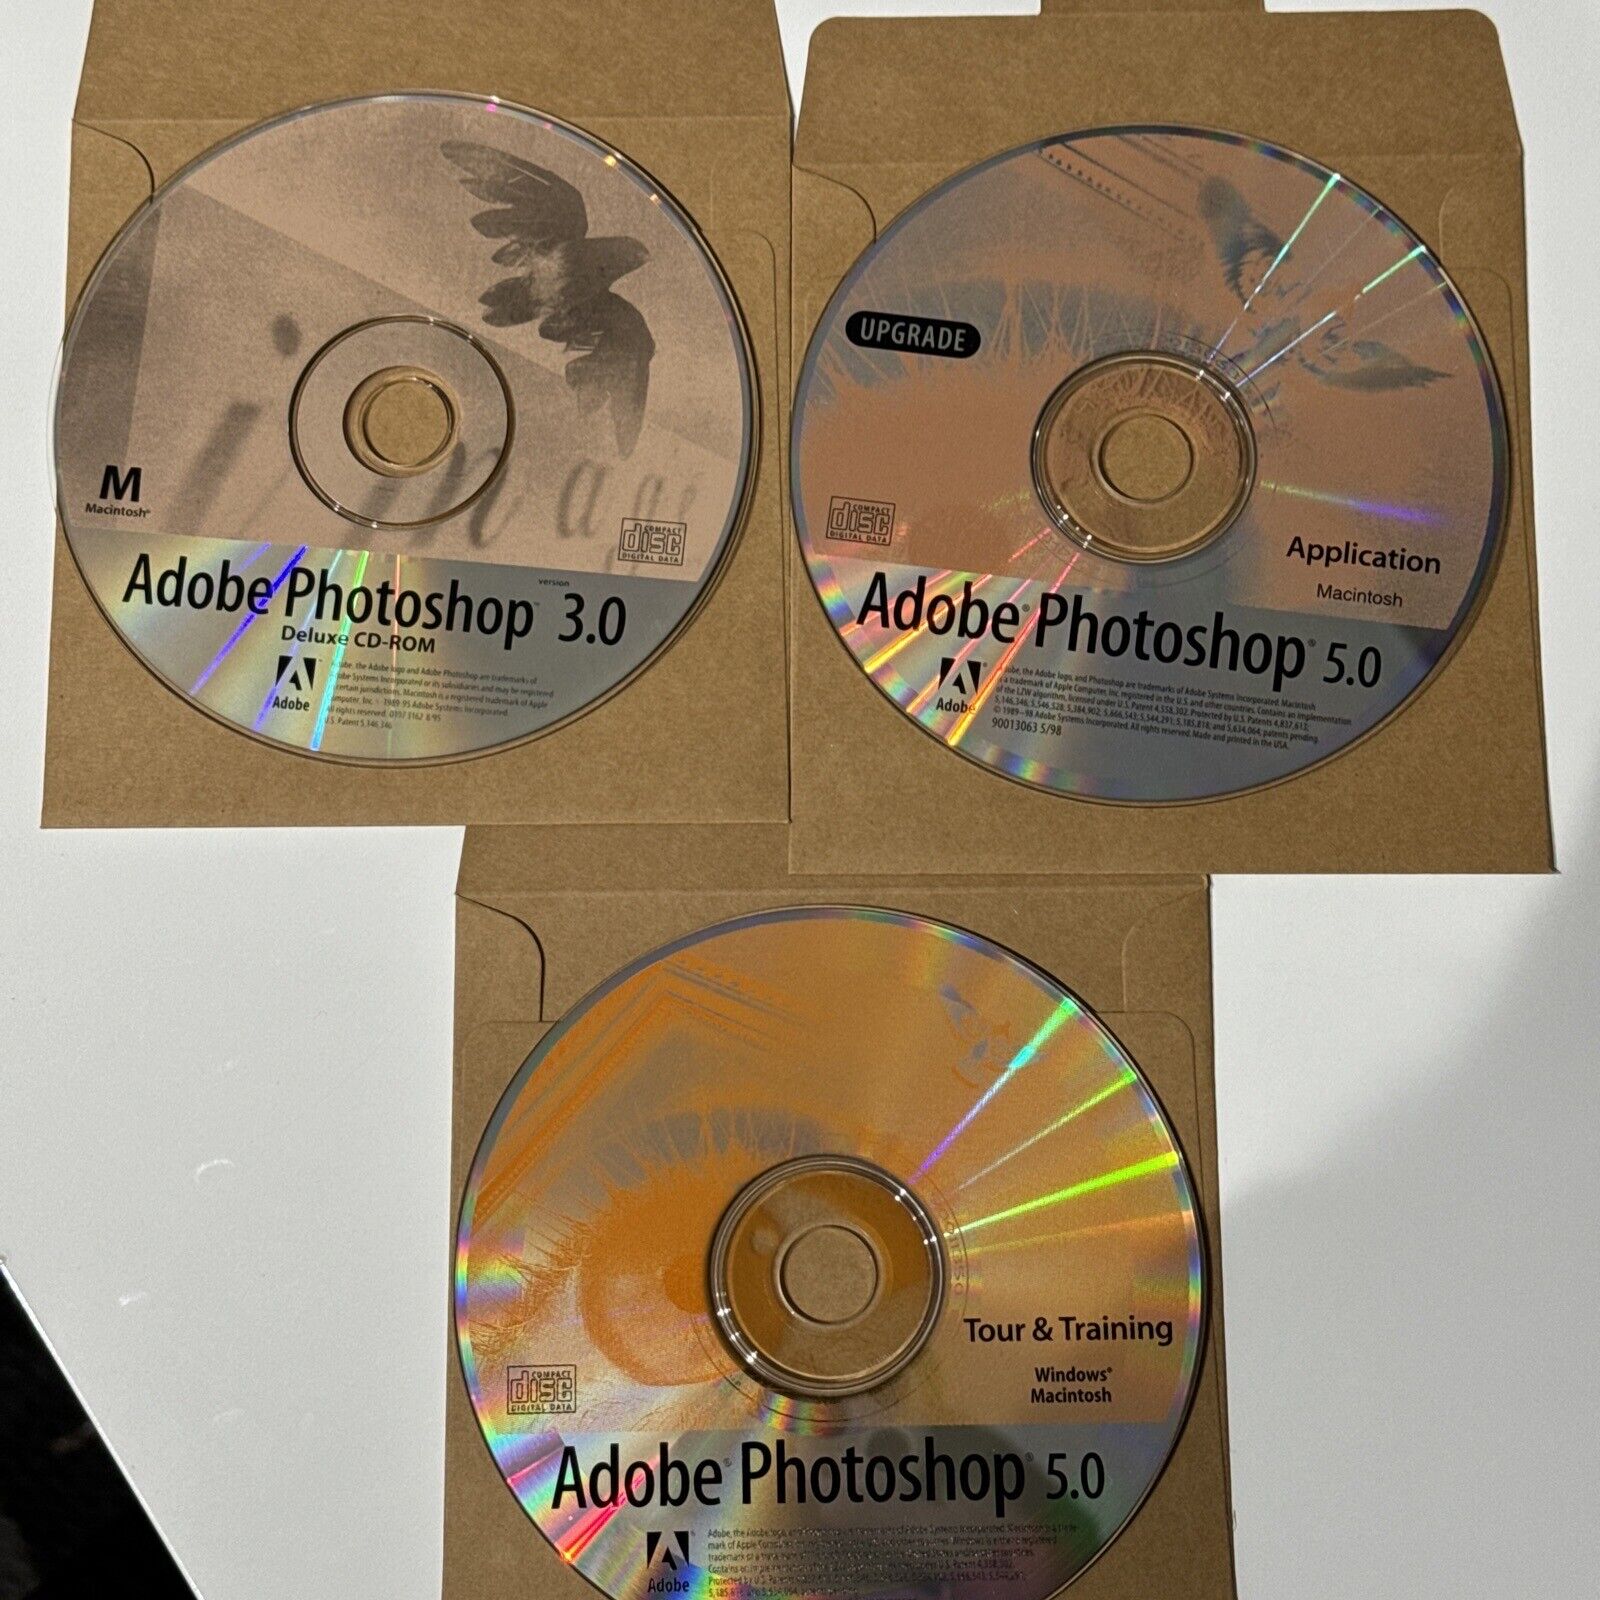 Adobe Photoshop 3.0 5.0 Upgrade & 5.0 Tours &Training CDs | No License Disc Only